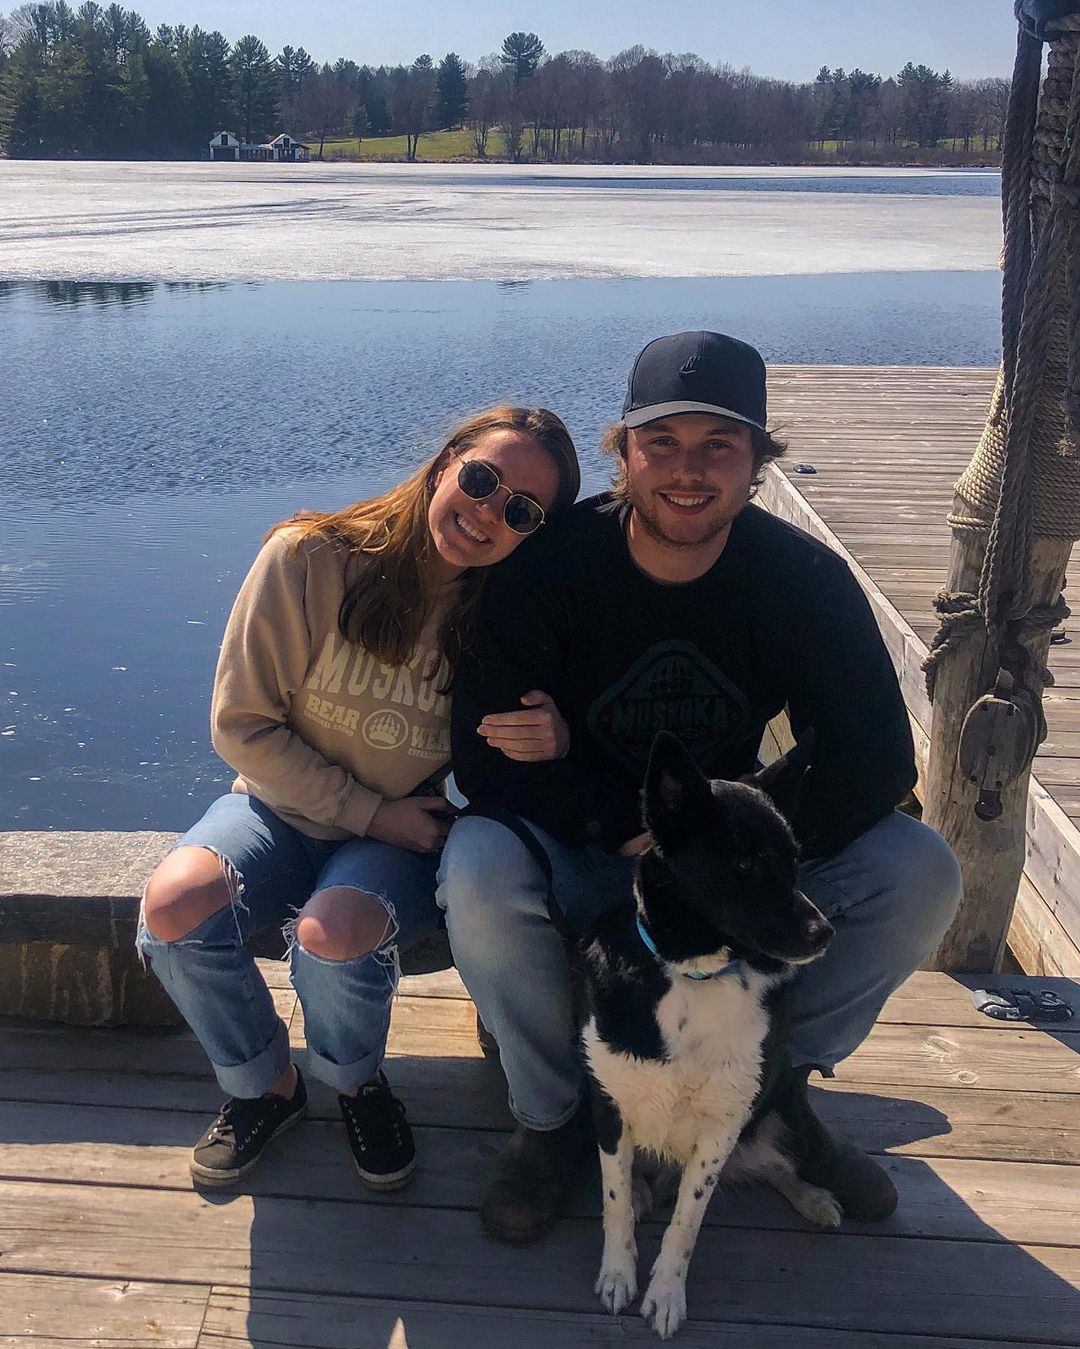 Canadian man and woman sitting on a dock wearing Muskoka Bear Wear posing with their dog